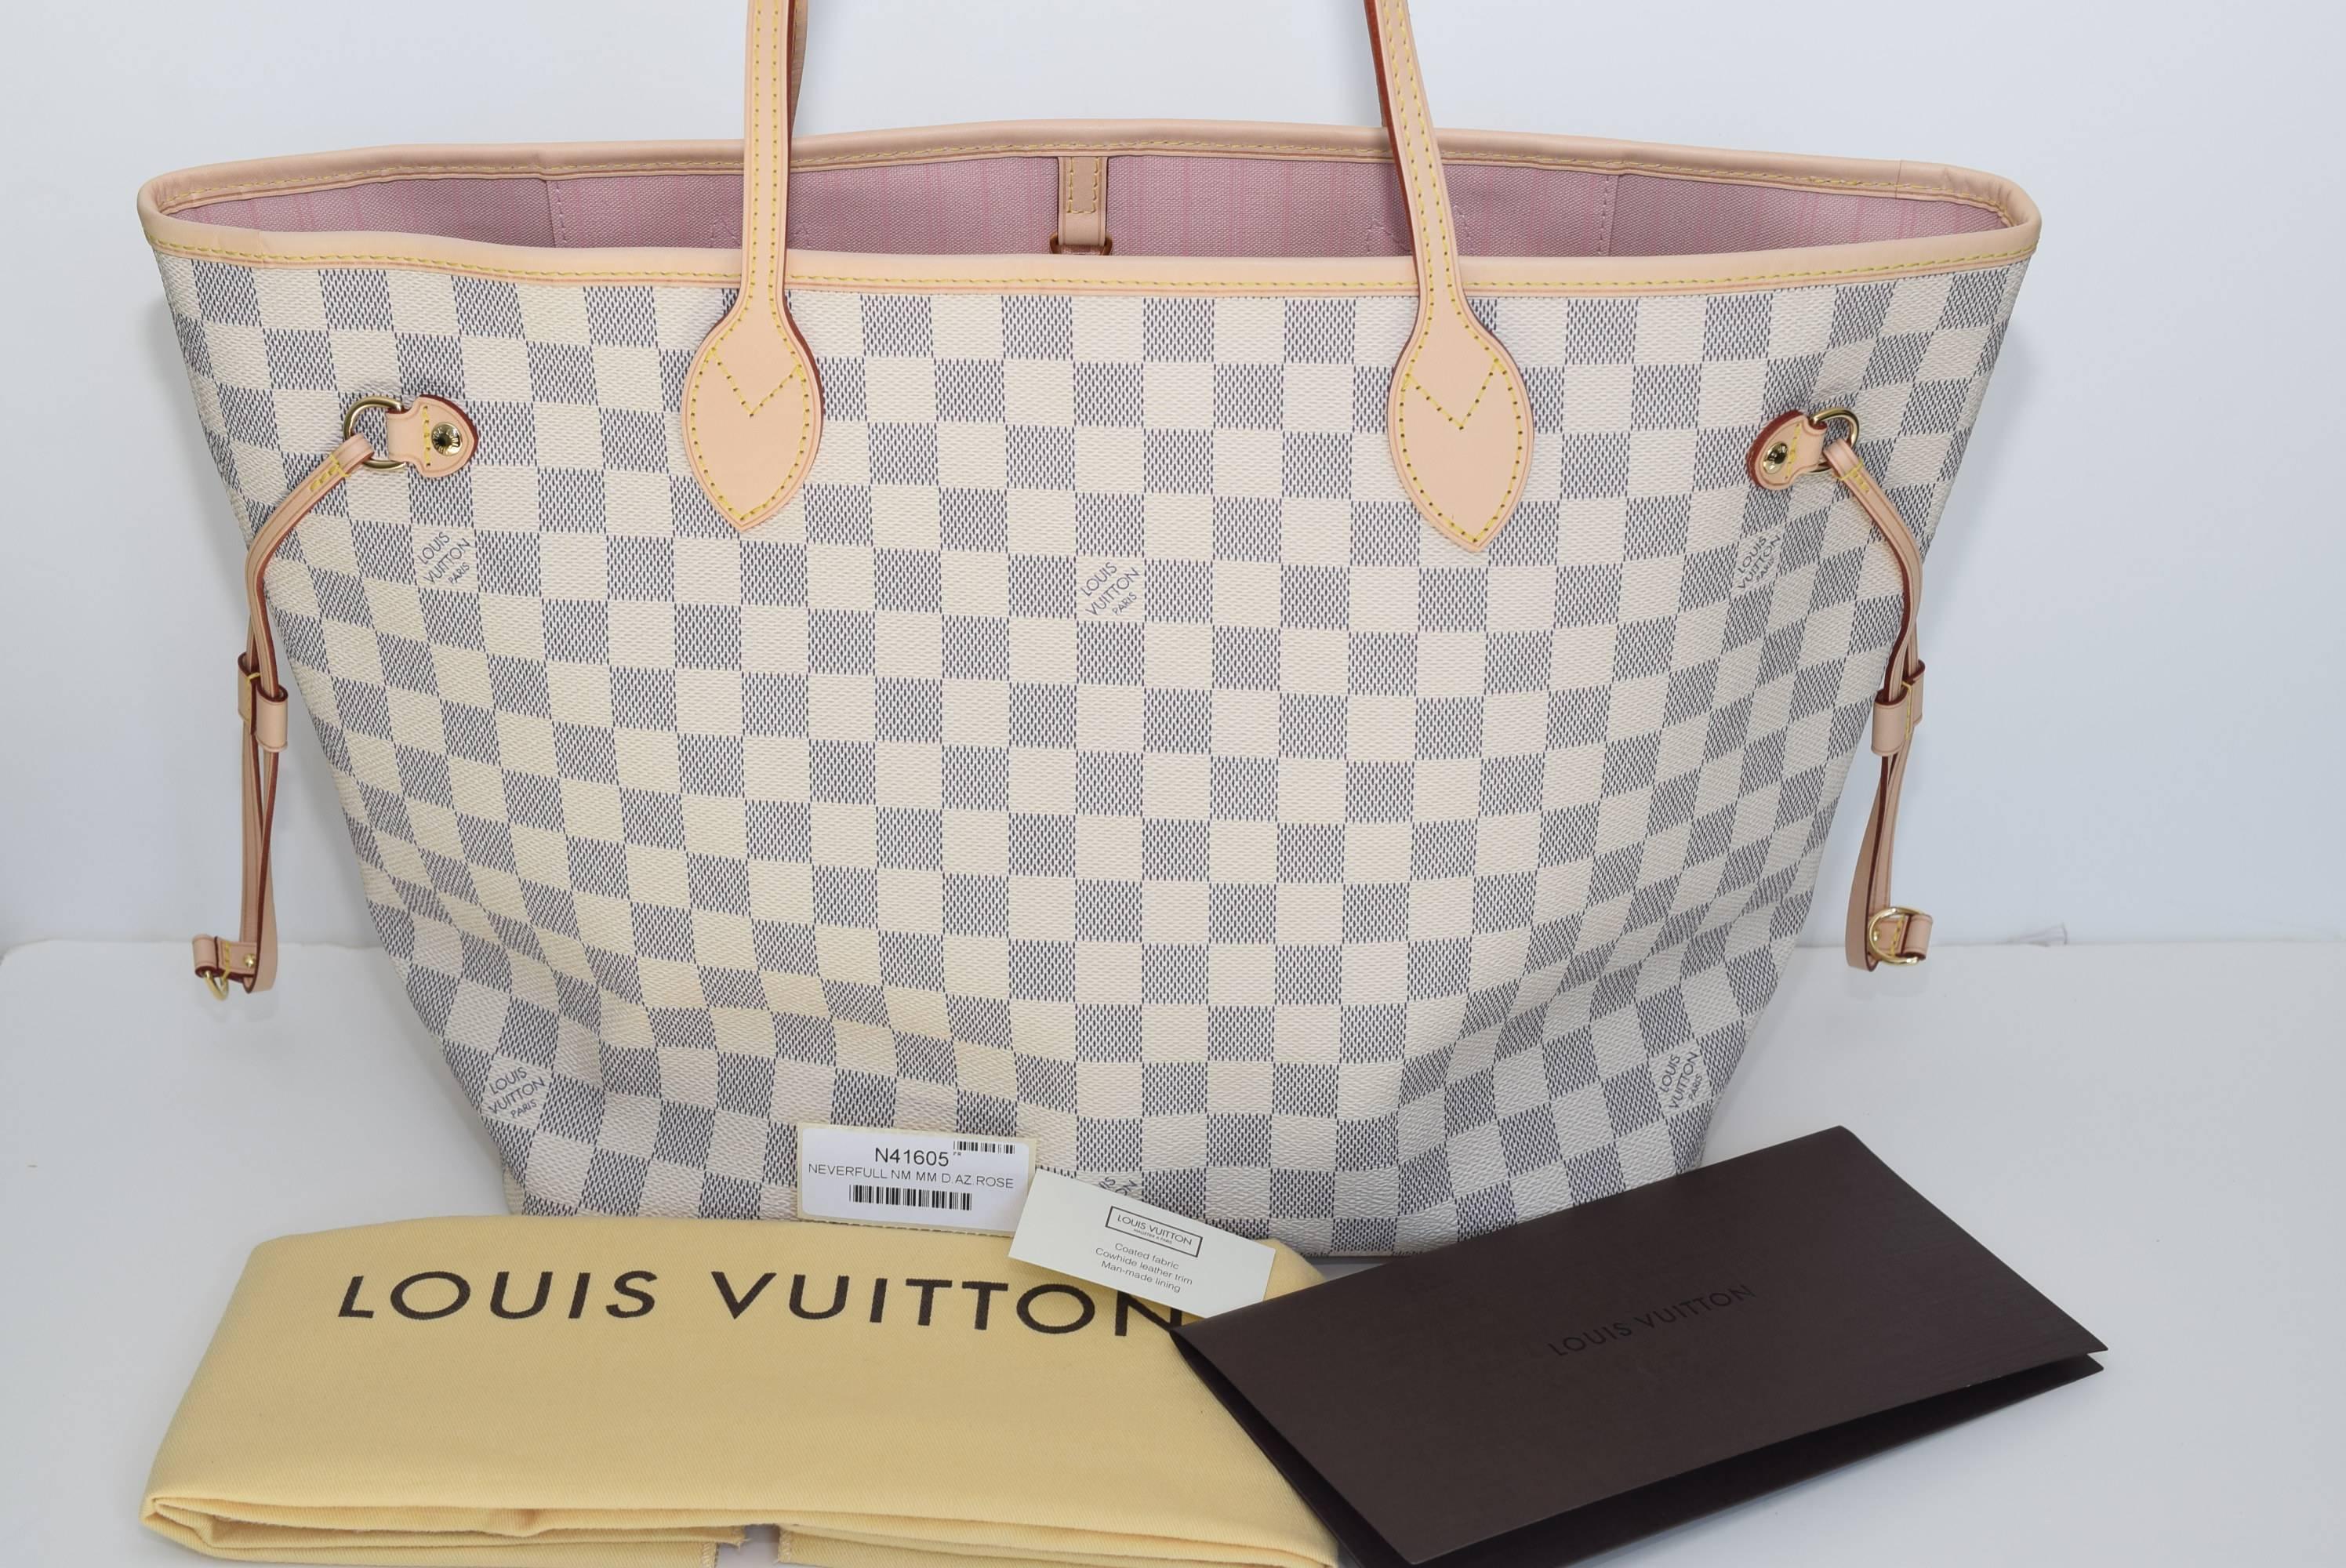 Brand new!!! 2016 New with Tags!! Louis Vuitton Neverfull Mm in Monogram Azur with Pink Ballerine lining - date code SR1176 - Made in France. Comes with Louis Vuitton Dust-bag, tags, and receipt. No Pochette. Free priority shipping both ways.